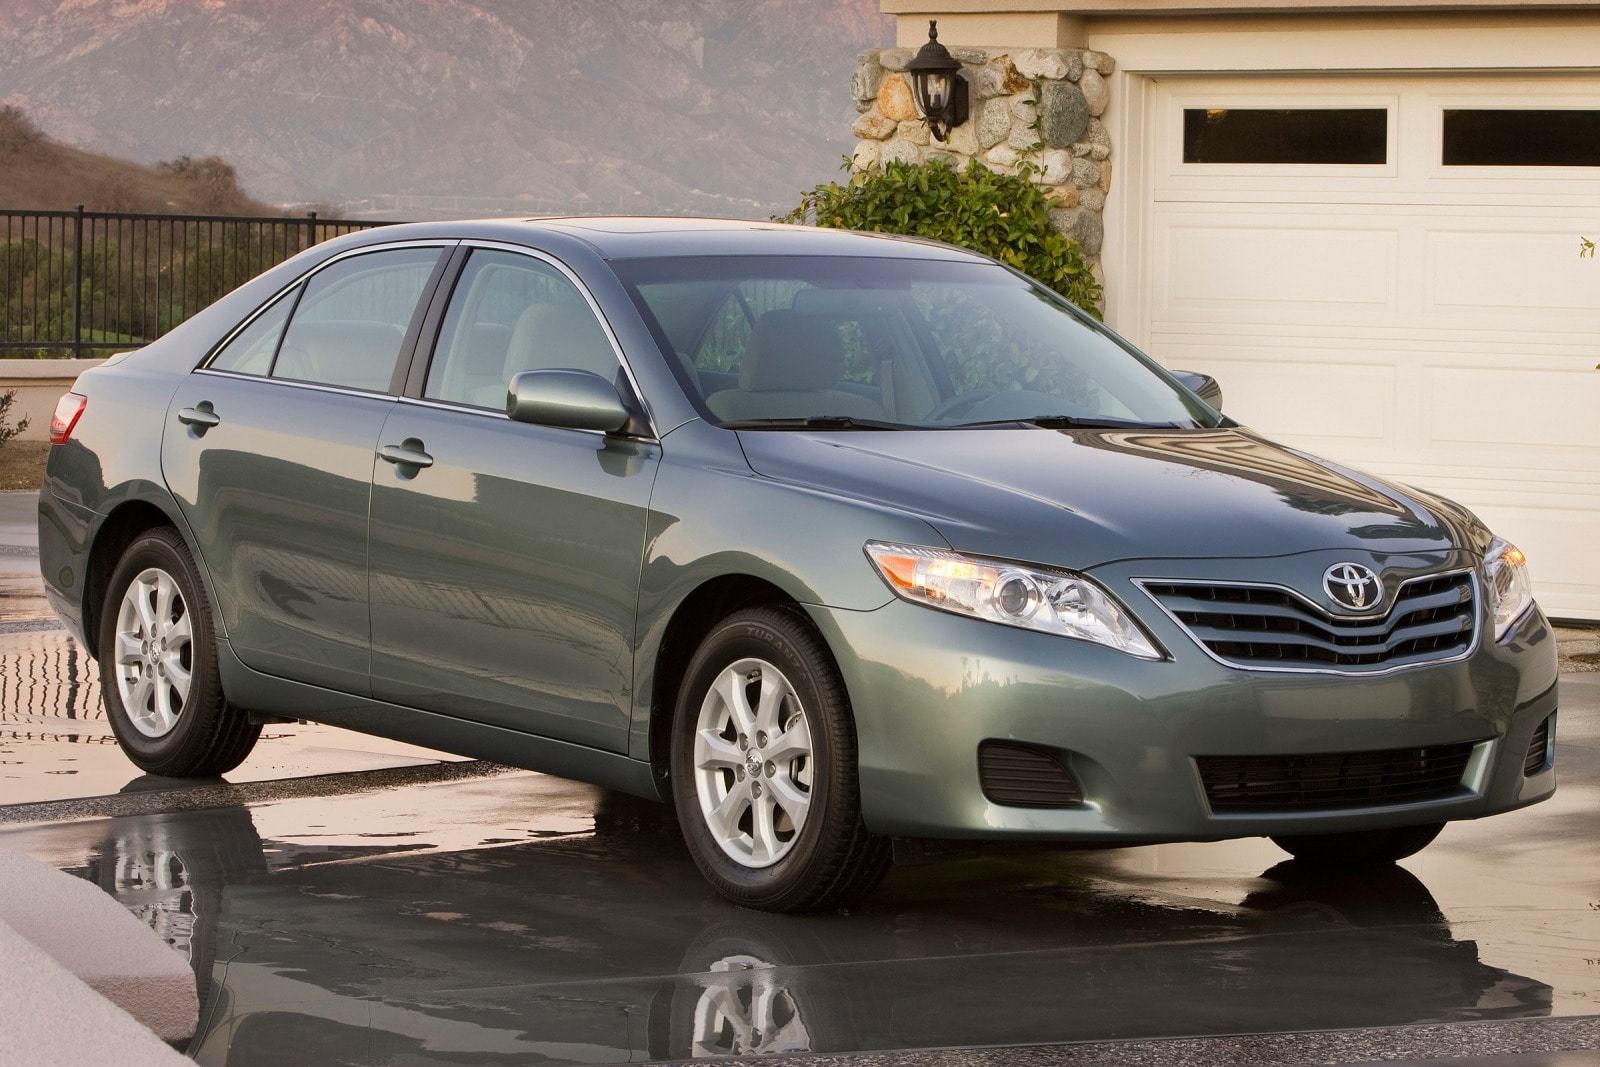 2010 Toyota Camry Review & Ratings | Edmunds